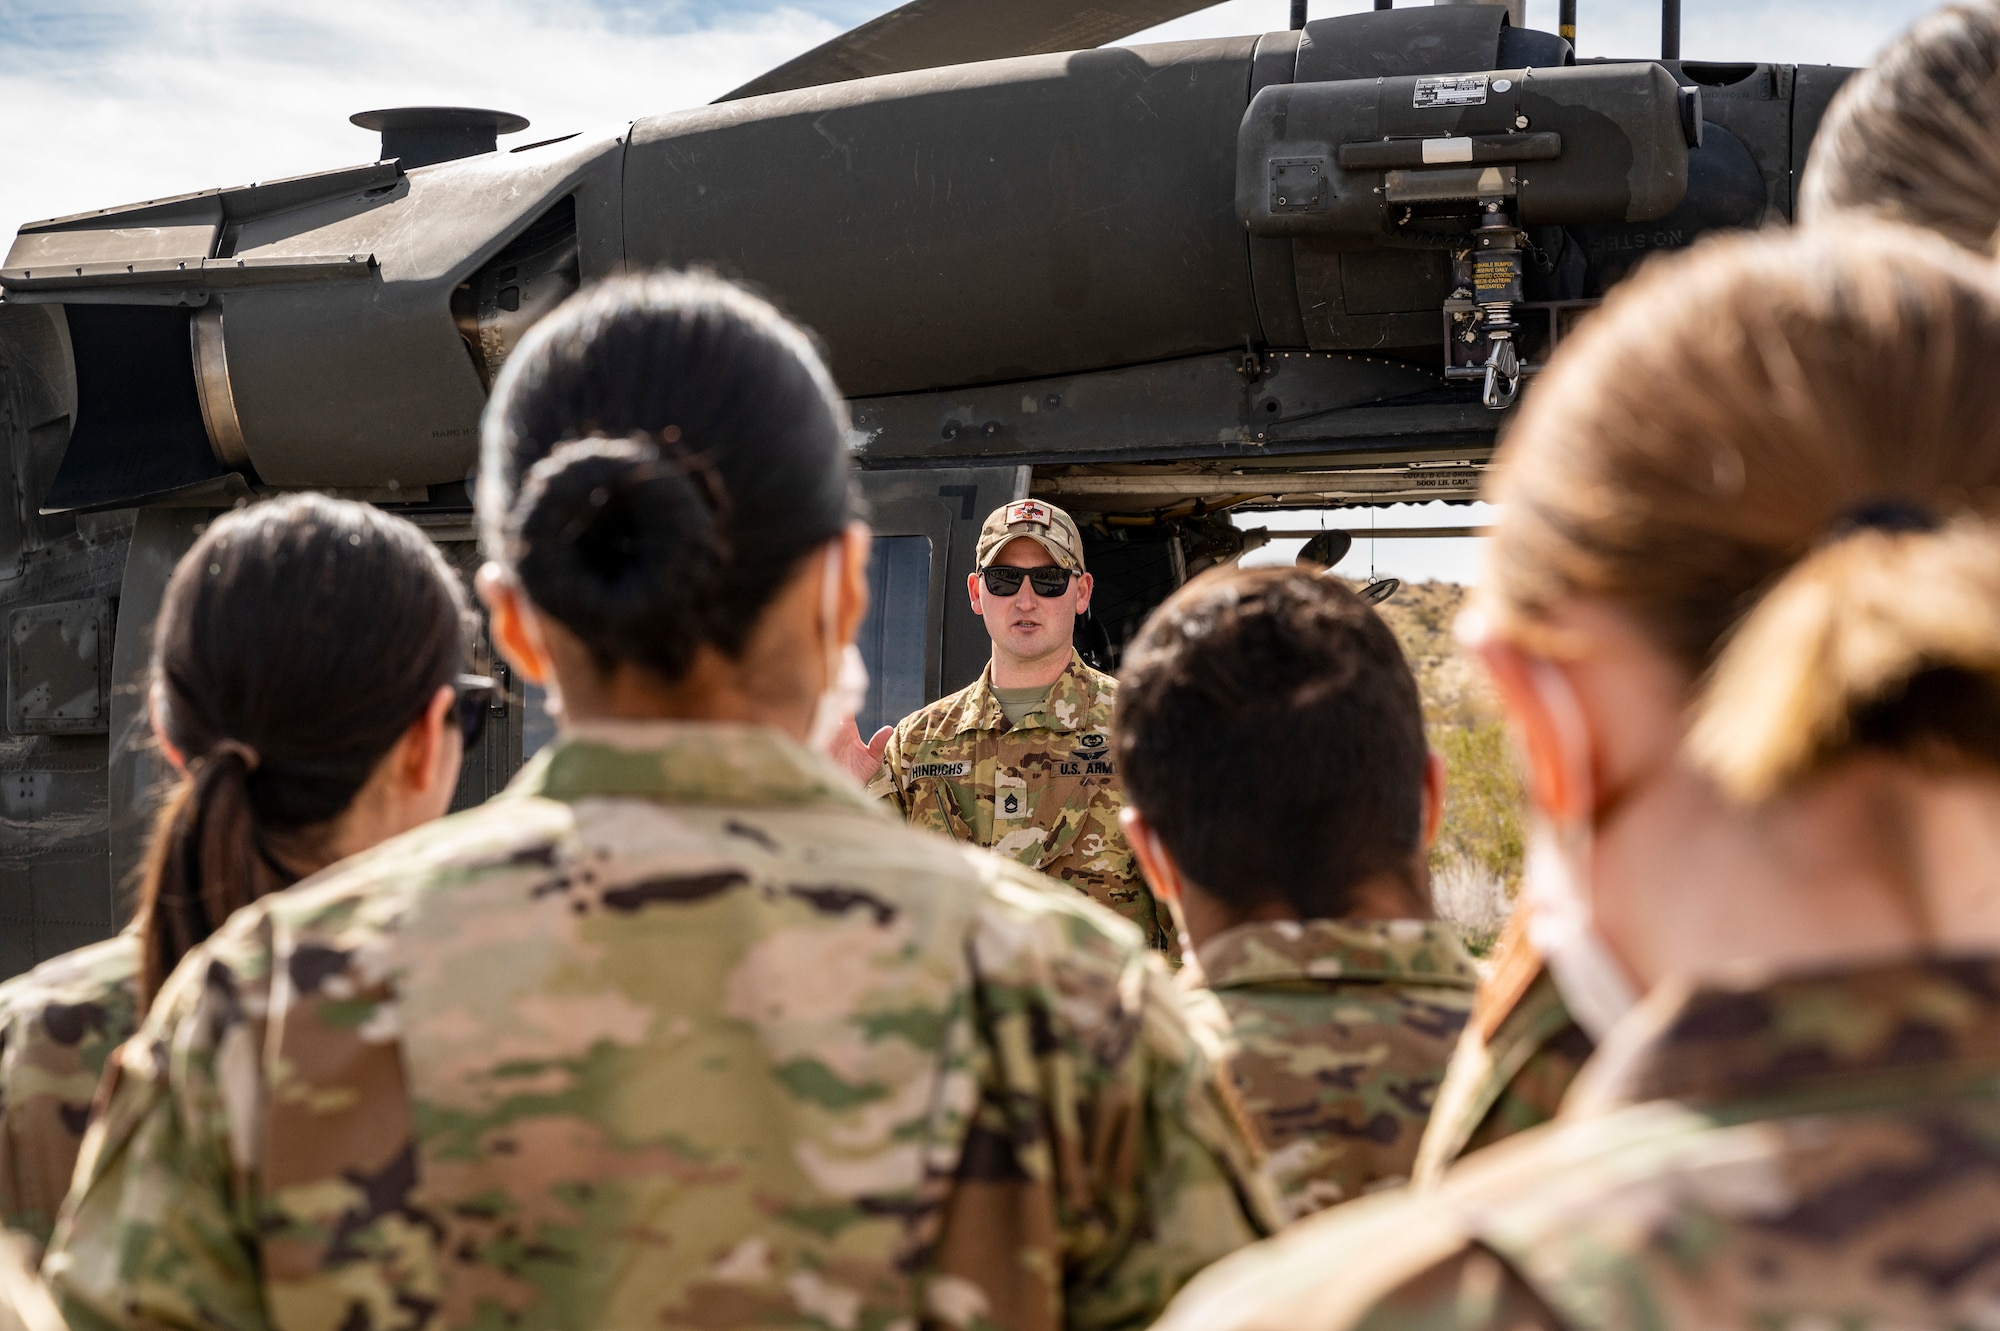 Soldiers from C Company, 2916th Aviation Battalion, 916th Support Brigade and Airmen from the 412th Medical Group, conduct medevac training at Edwards Air Force Base, California, March 3. (Air Force photo by Katherine Franco)